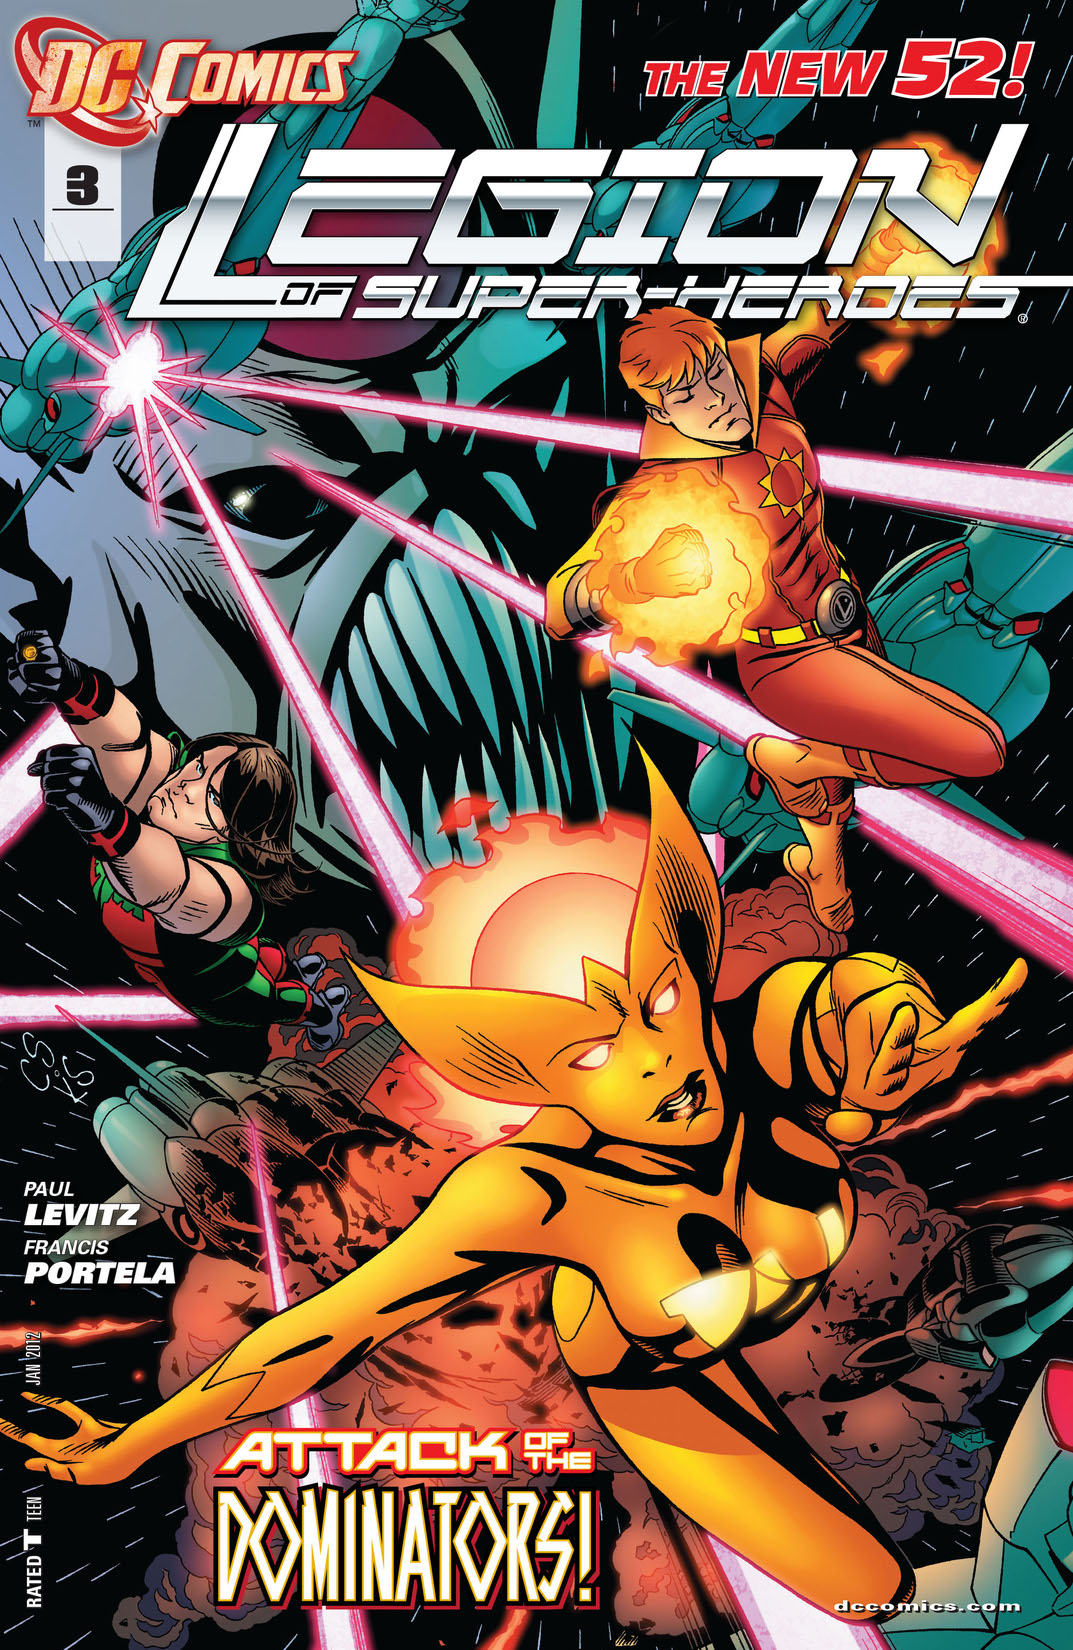 Legion of Super-Heroes (2011-) #3 preview images